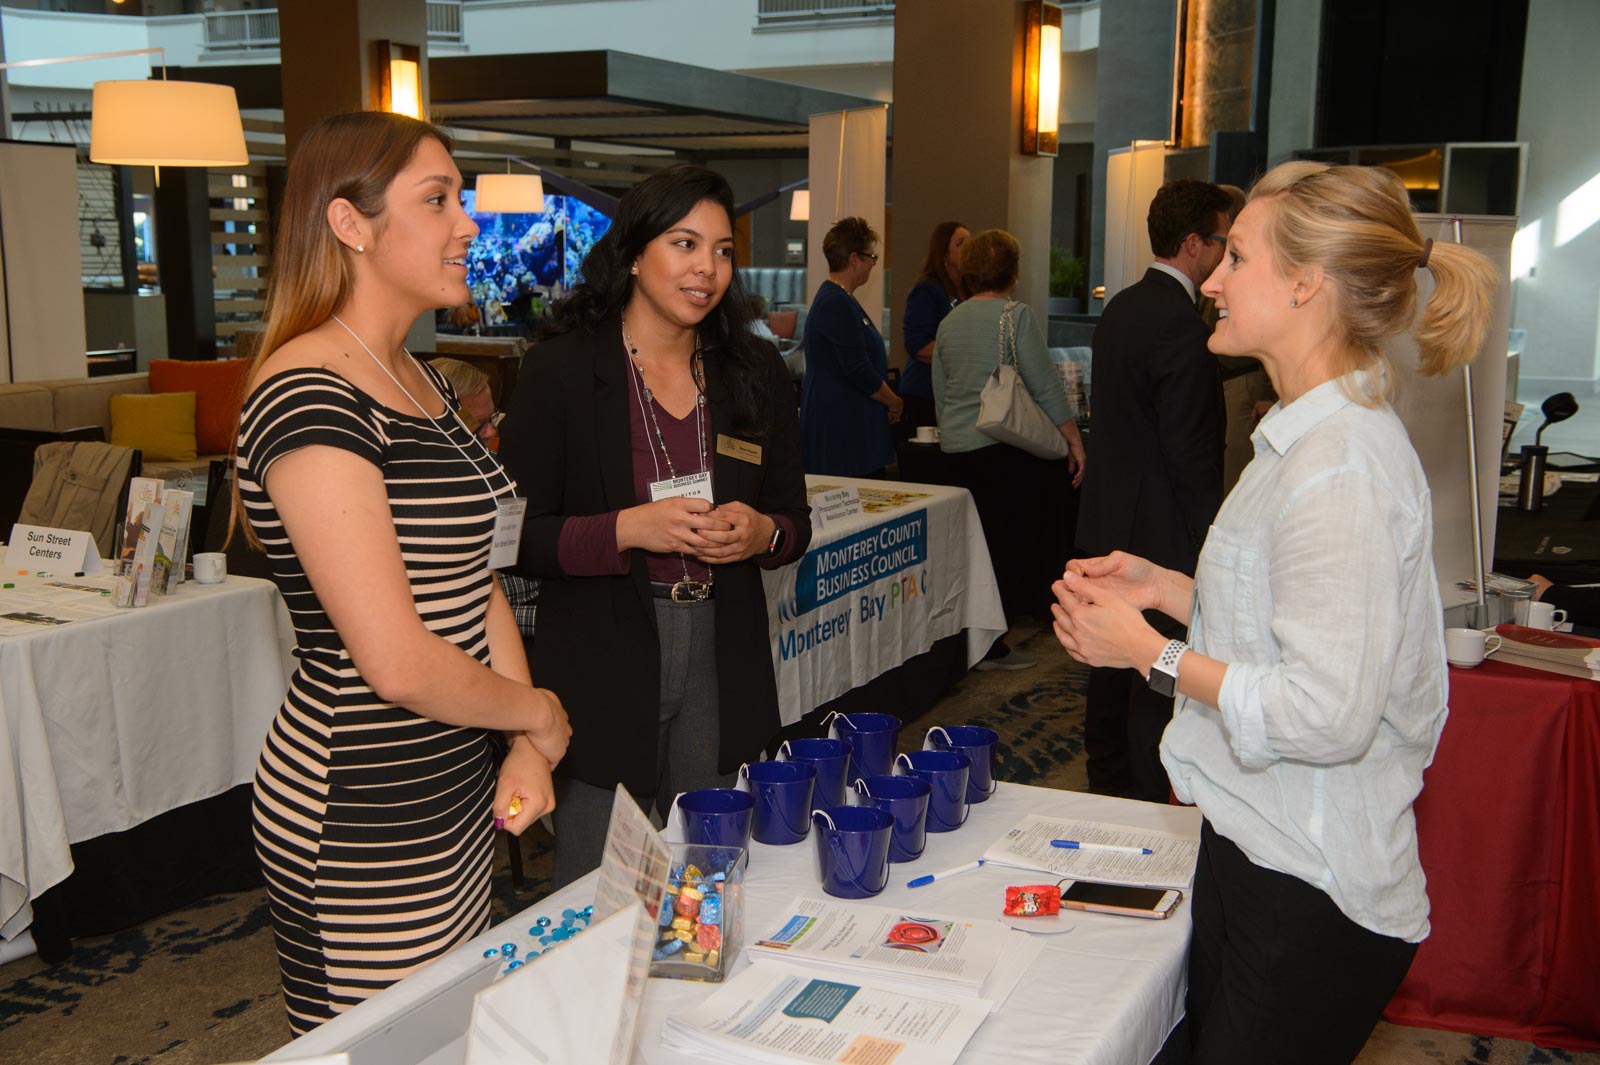 Students networking at MPCC Business Summit